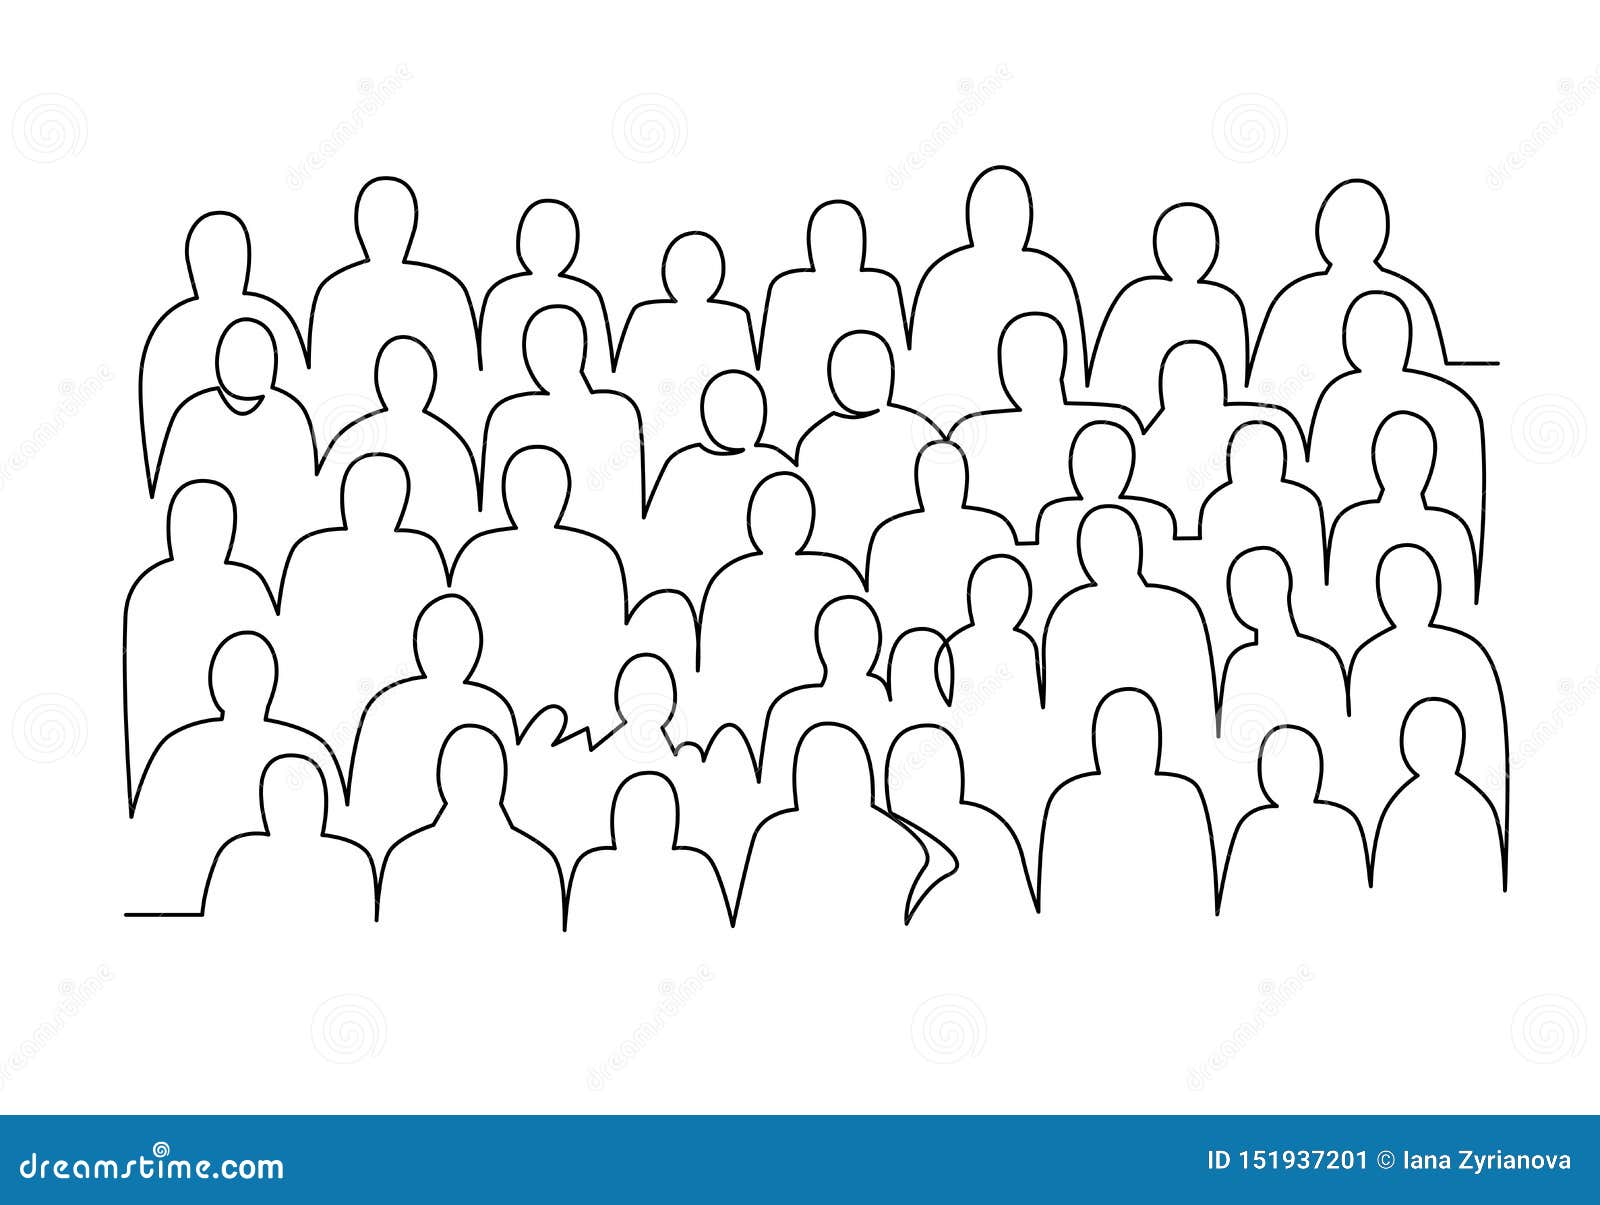 Crowd of people standing sketch Royalty Free Vector Image